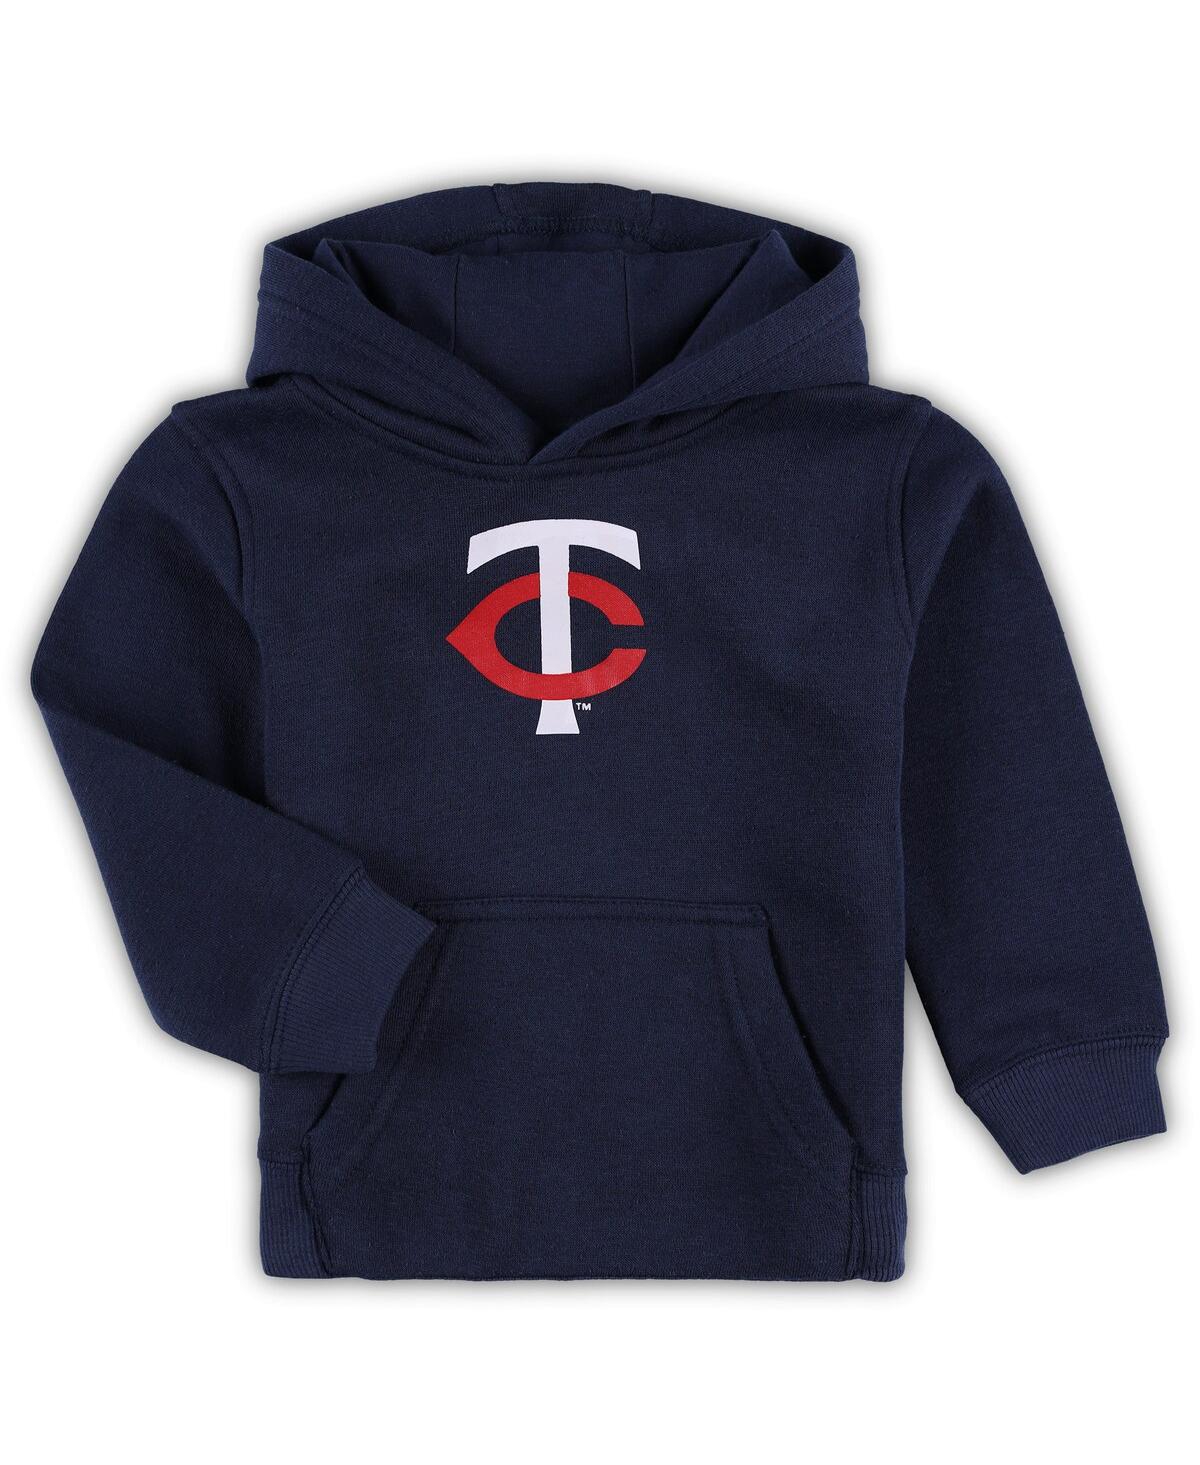 Shop Outerstuff Toddler Boys And Girls Navy Minnesota Twins Team Primary Logo Fleece Pullover Hoodie